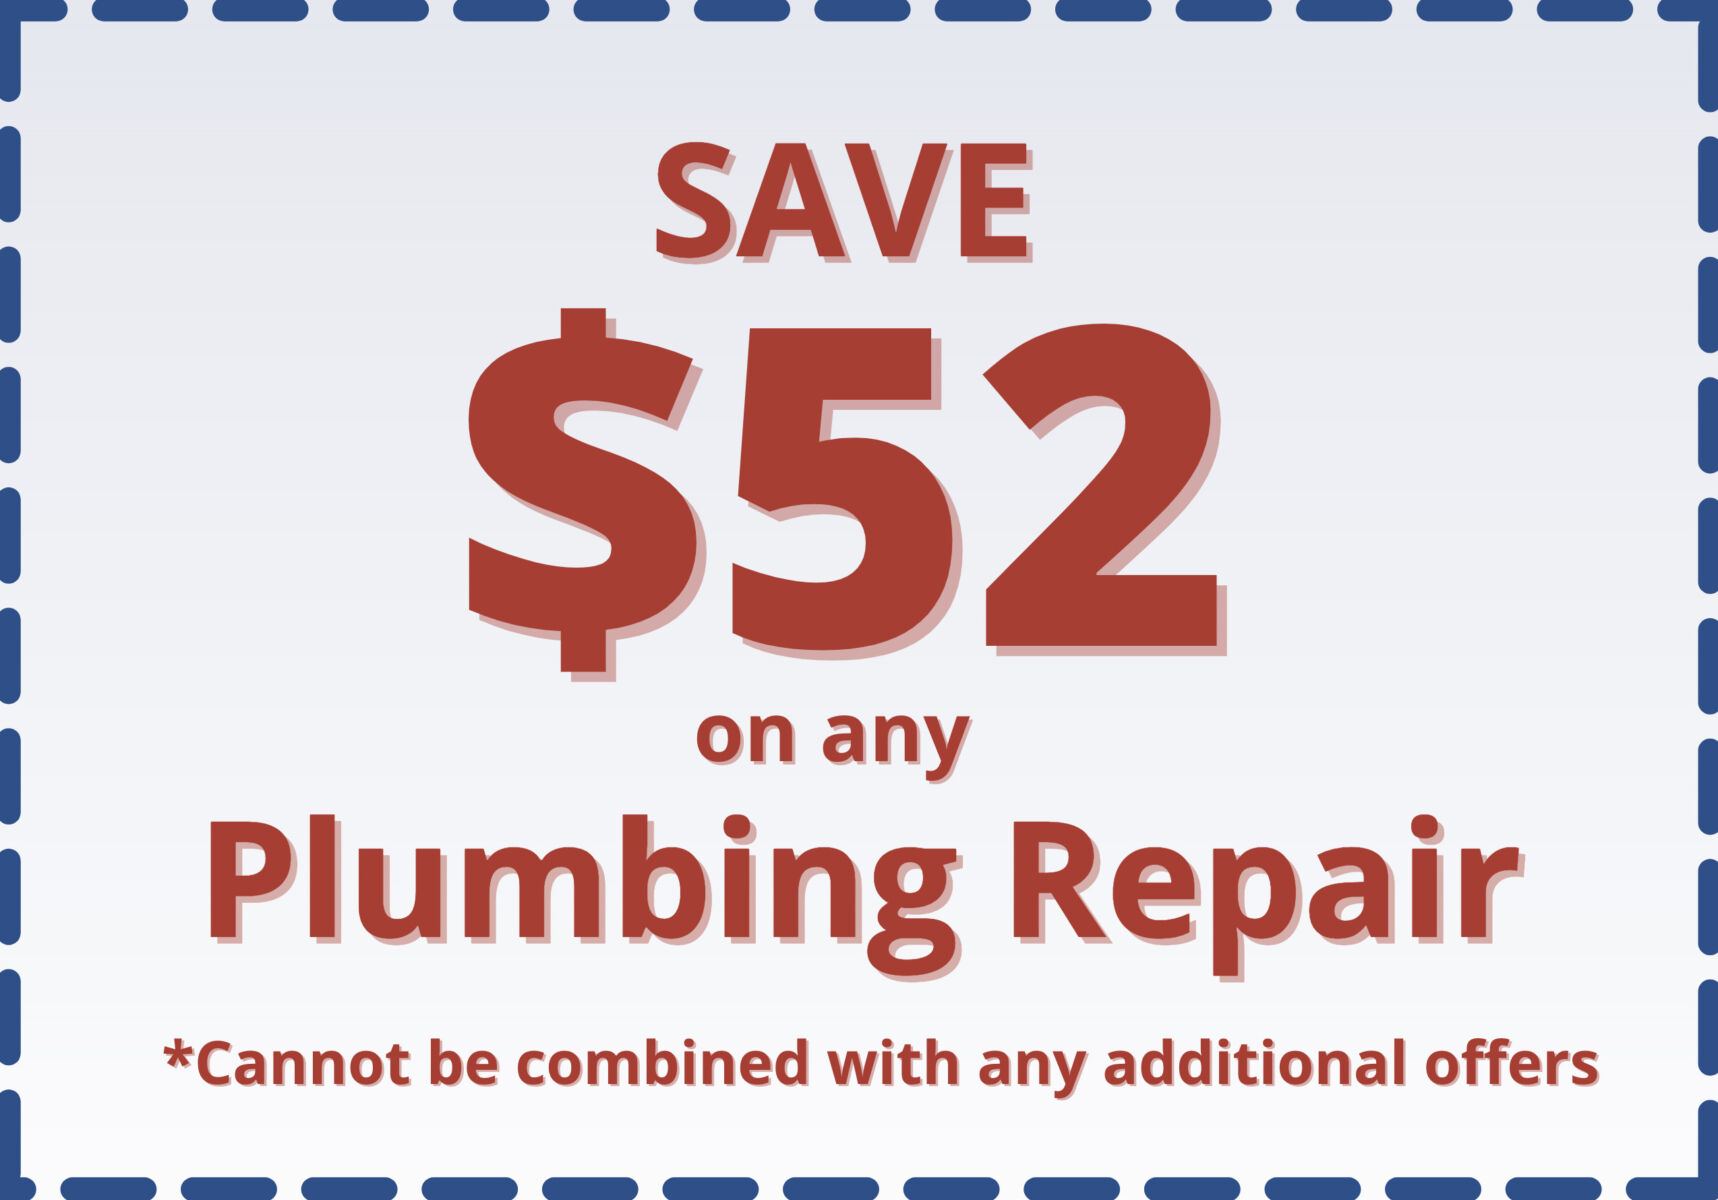 Save $52 on any Plumning Repair